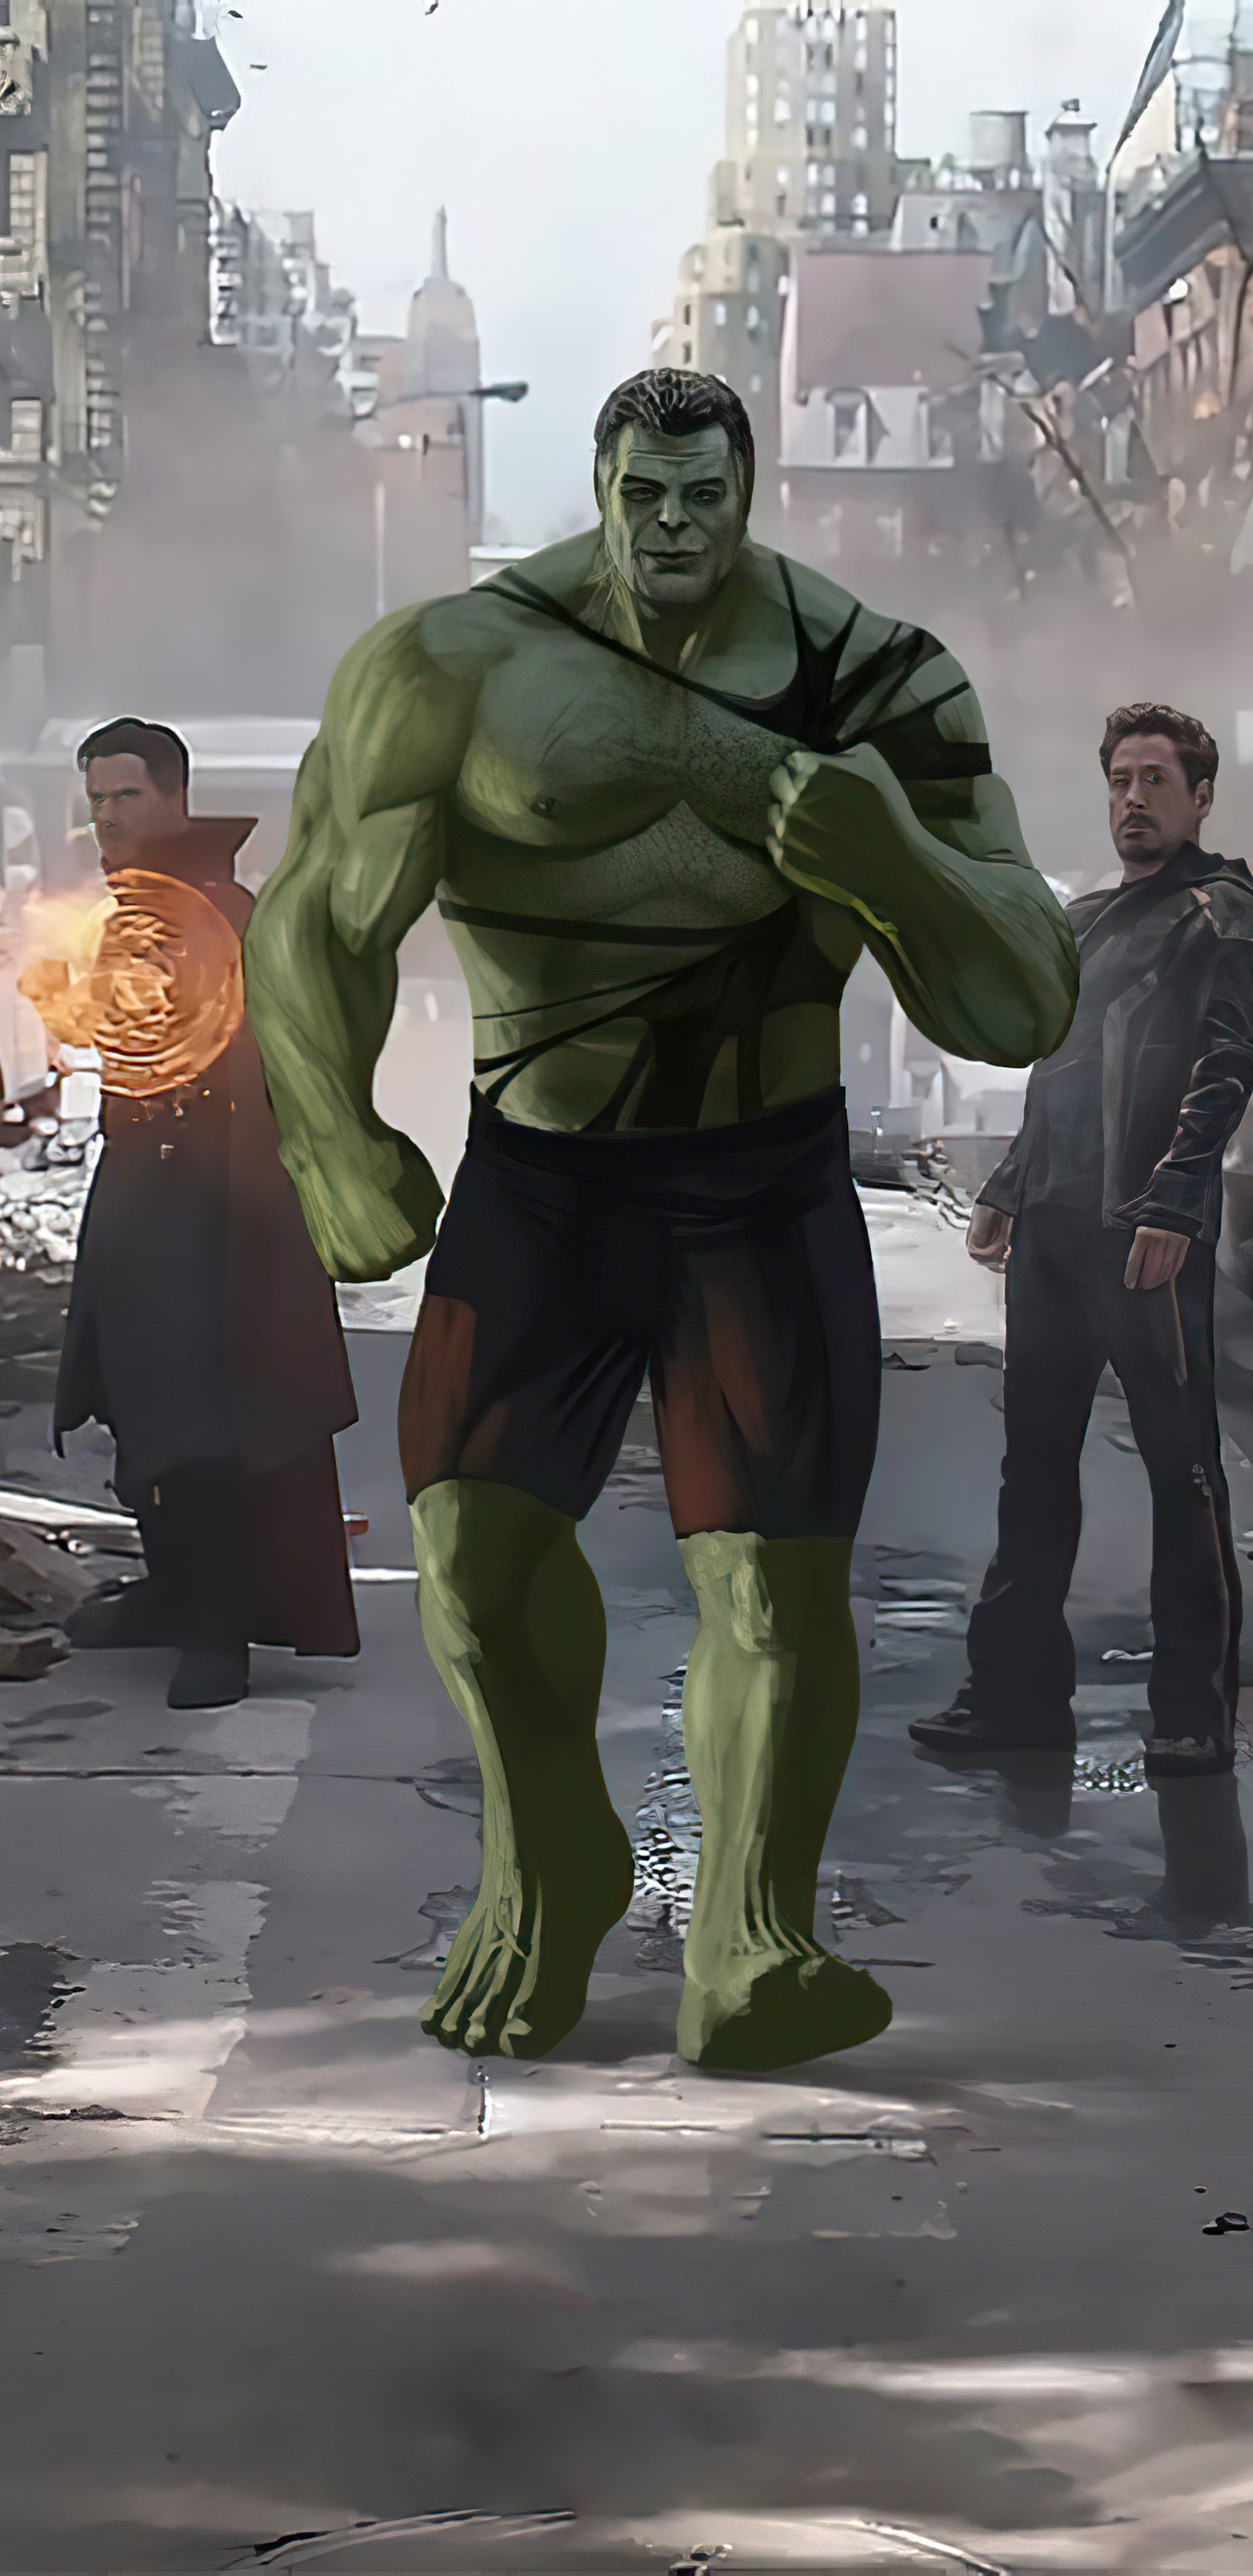 1440x2960 Smart Hulk With Team Samsung Galaxy Note 9,8, S9,S8,S8+ QHD HD 4k  Wallpapers, Images, Backgrounds, Photos and Pictures